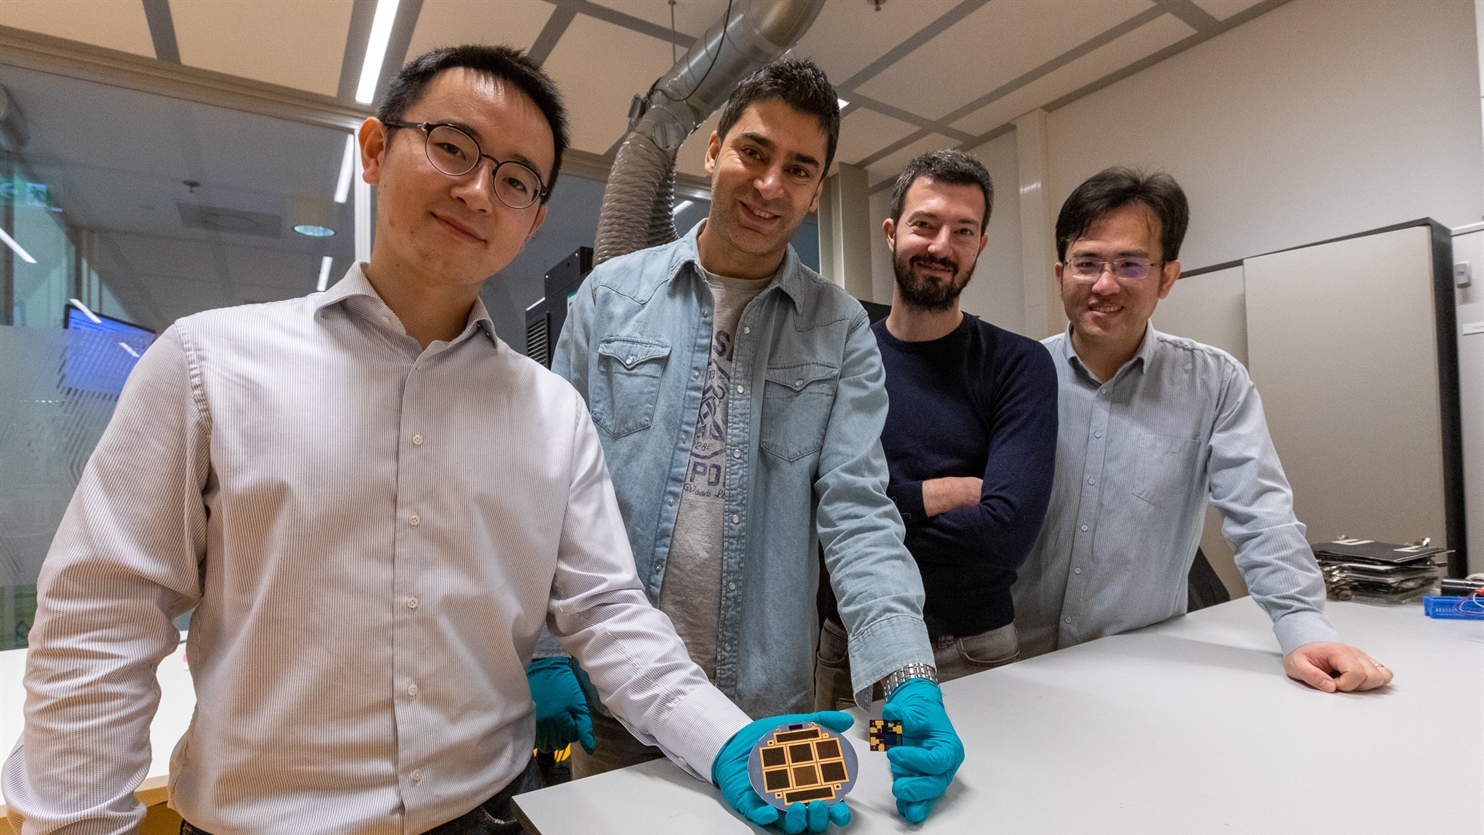 Yifeng Zhao (TUDelft) - Mehrdad Najafi (TNO) - Valerio Zardetto (TNO) - Dong Zhang (TNO) with solar cell in hands